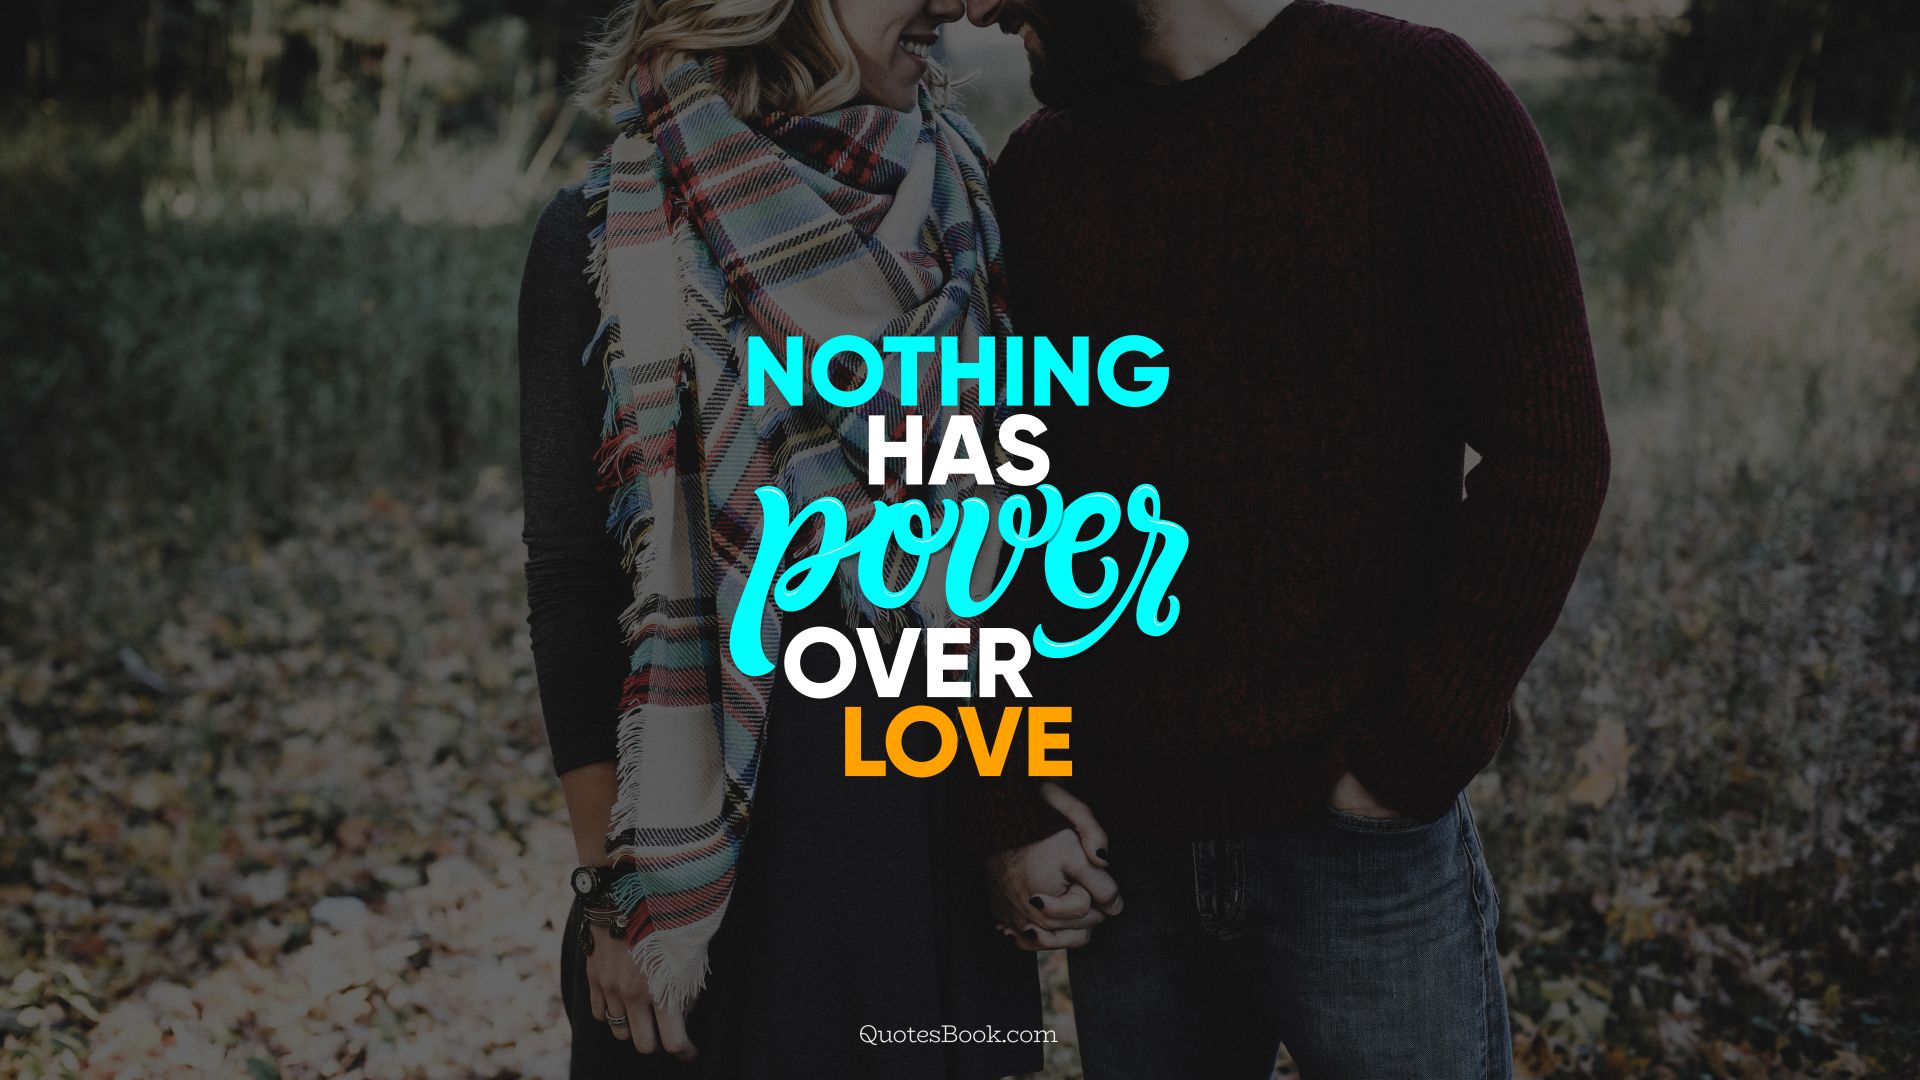 Nothing has power over love. - Quote by QuotesBook